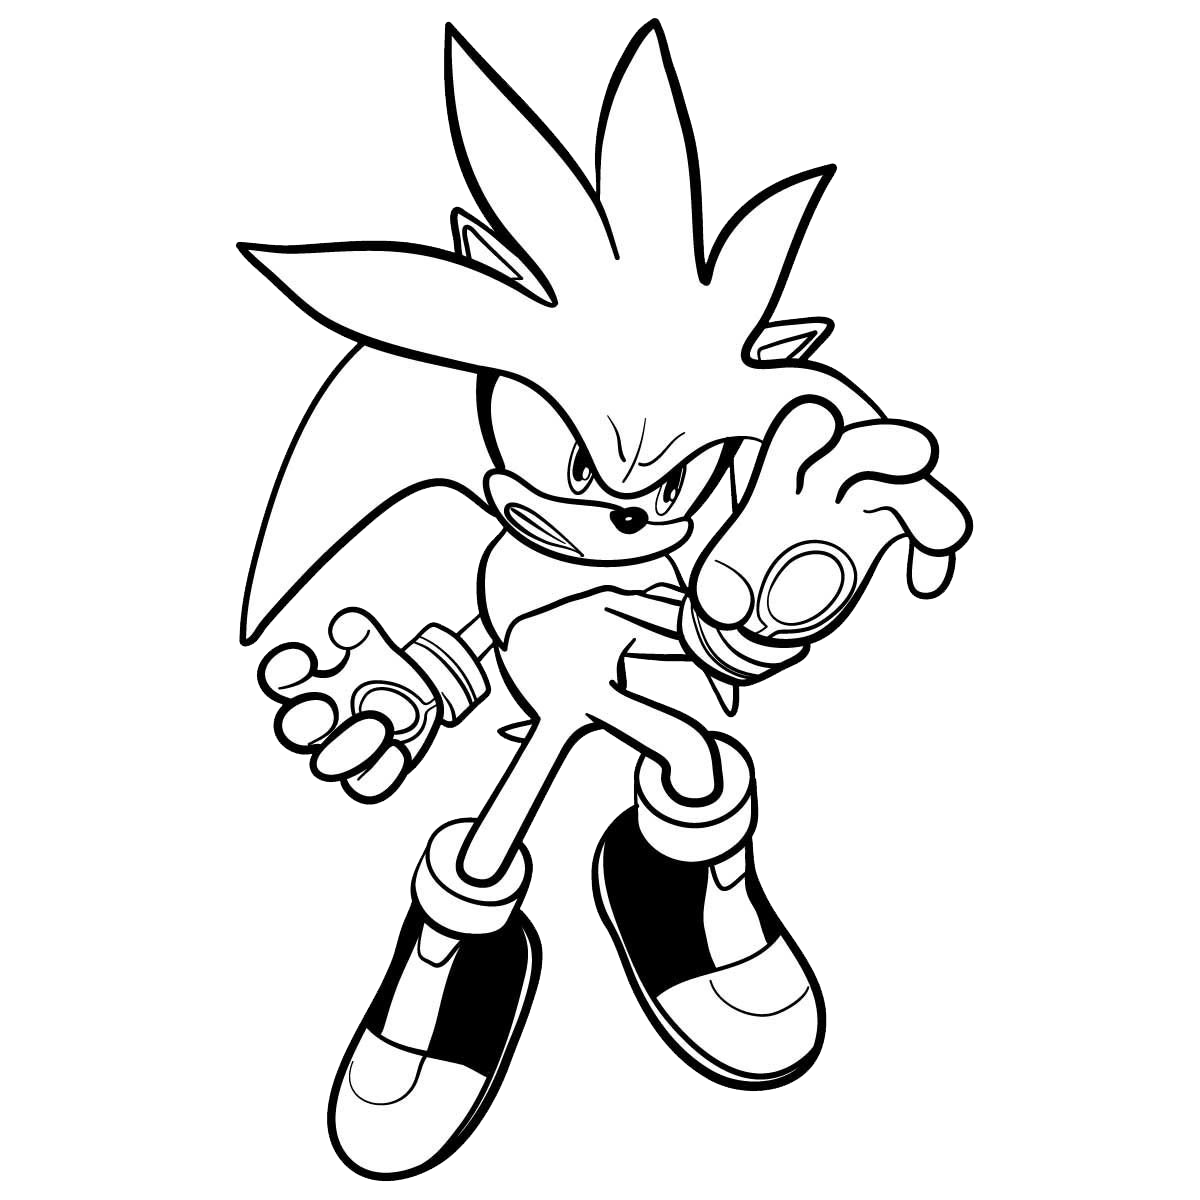 Silver The Hedgehog PNG Image